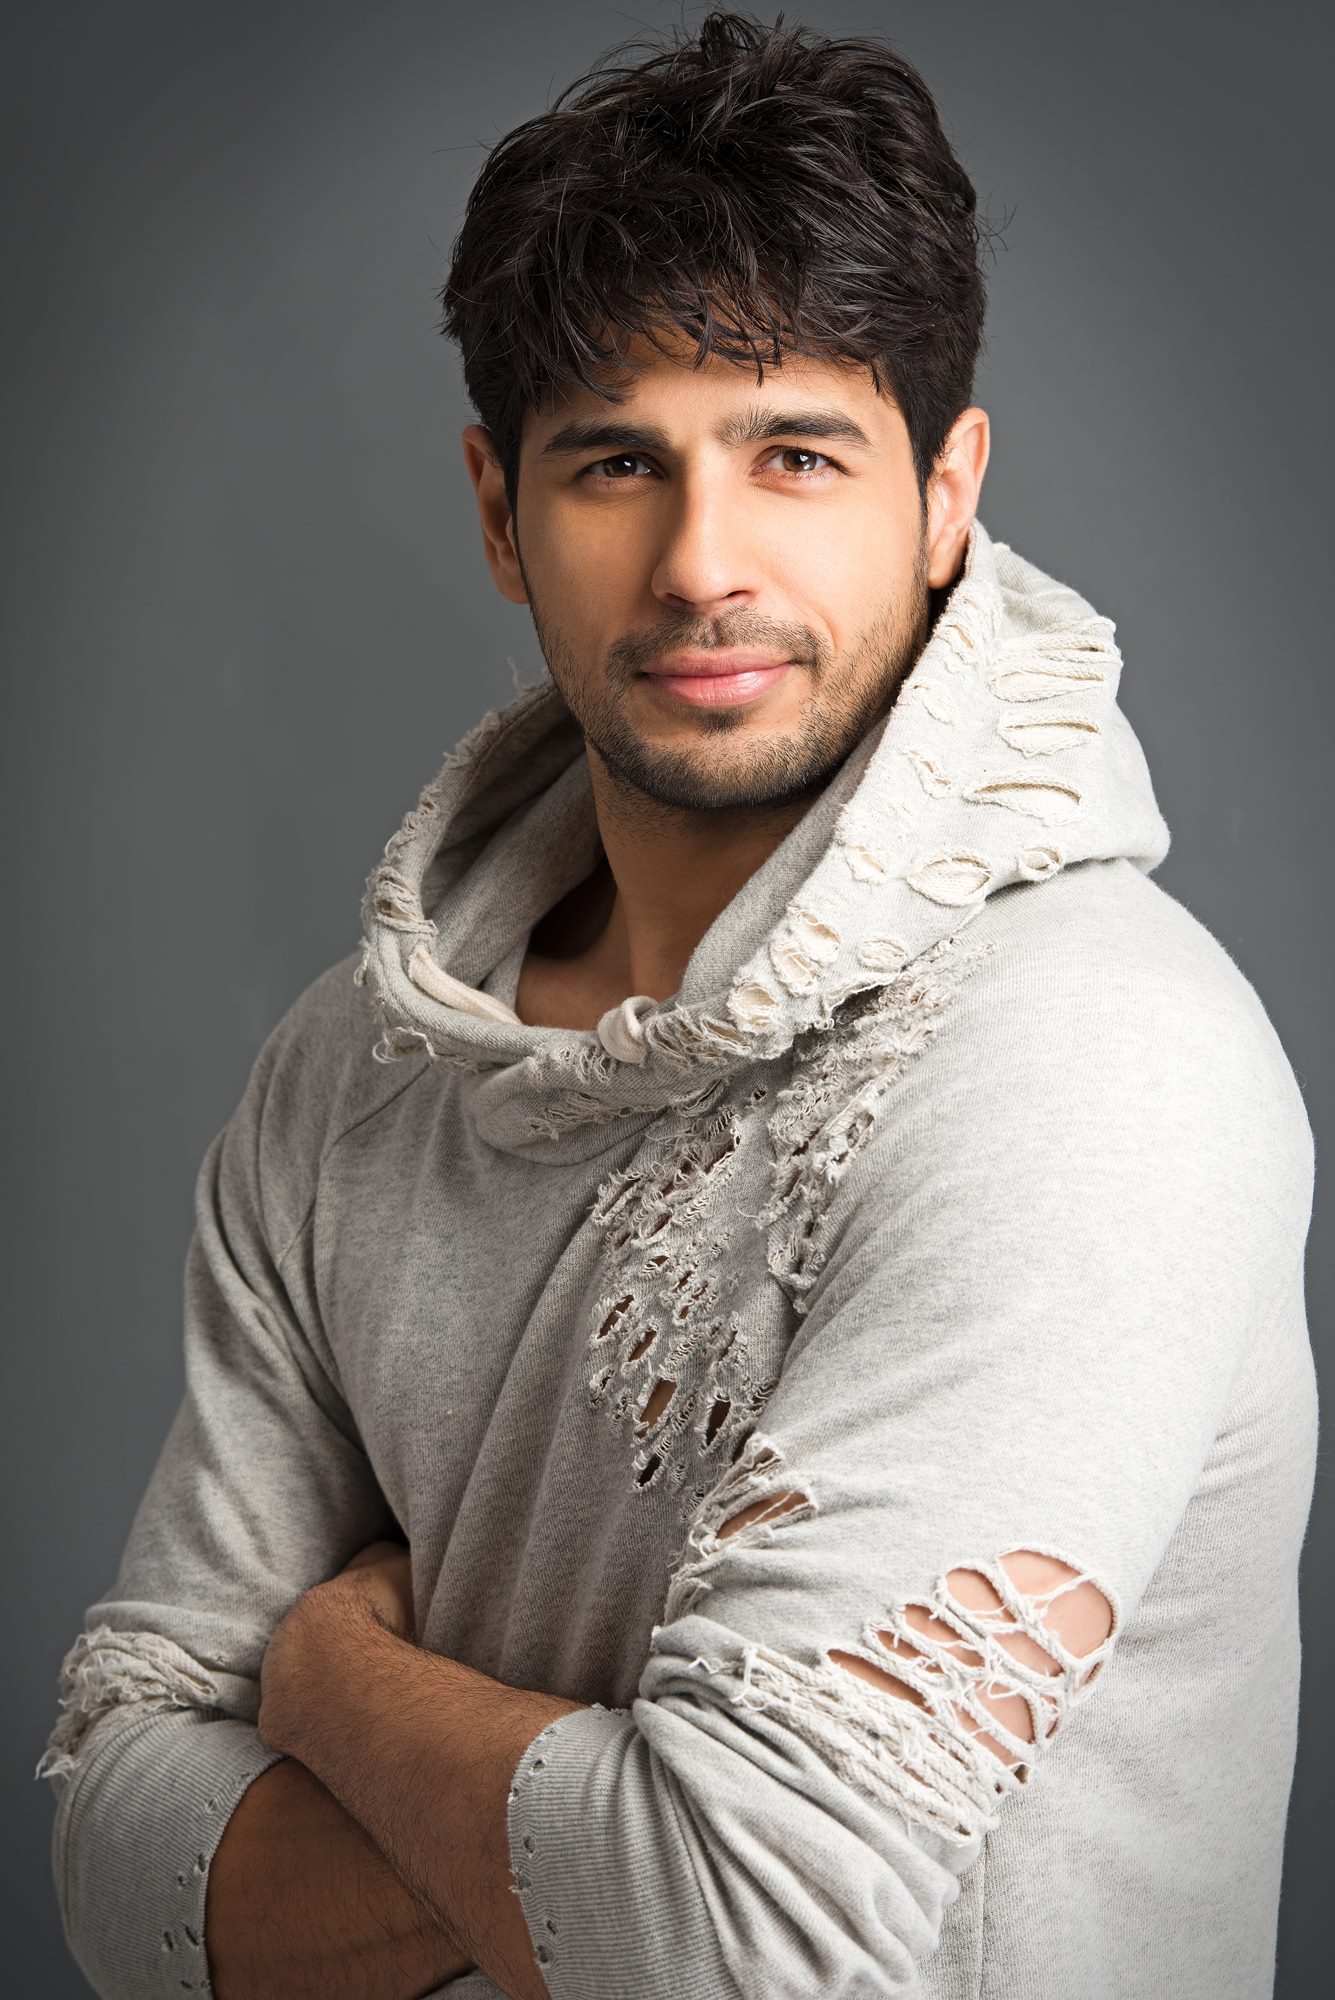 Facts about Sidharth Malhotra